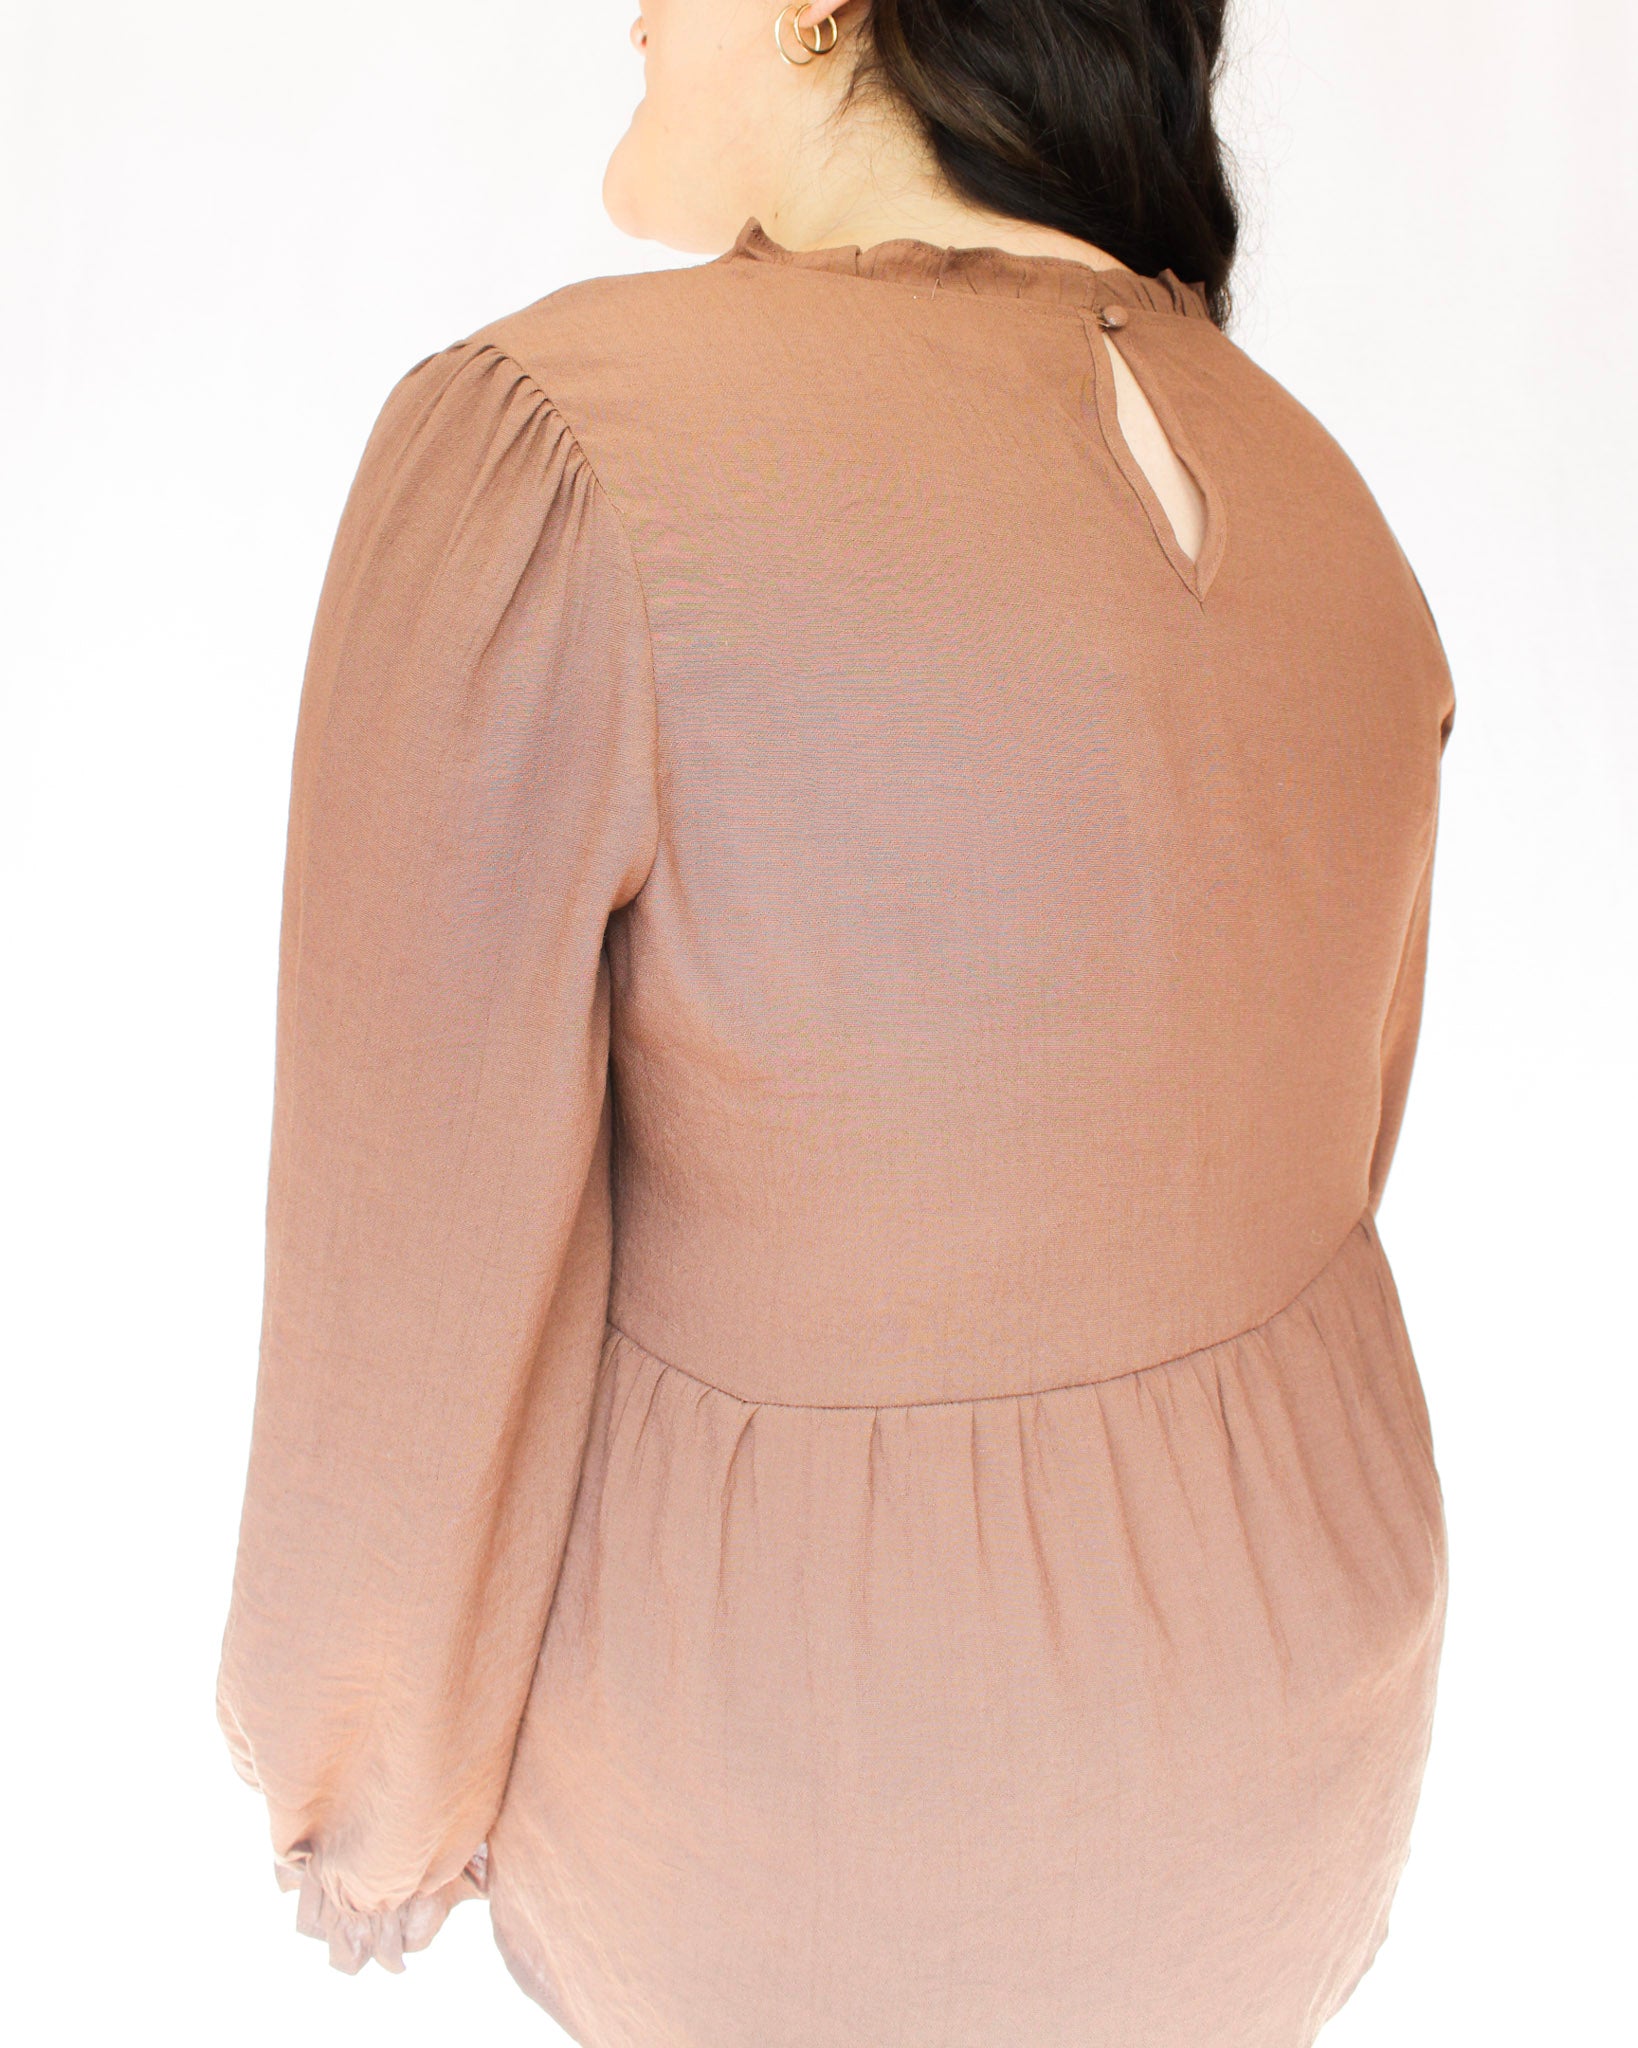 Brown long sleeve peplum long sleeve top with white floral detailing down the front sides